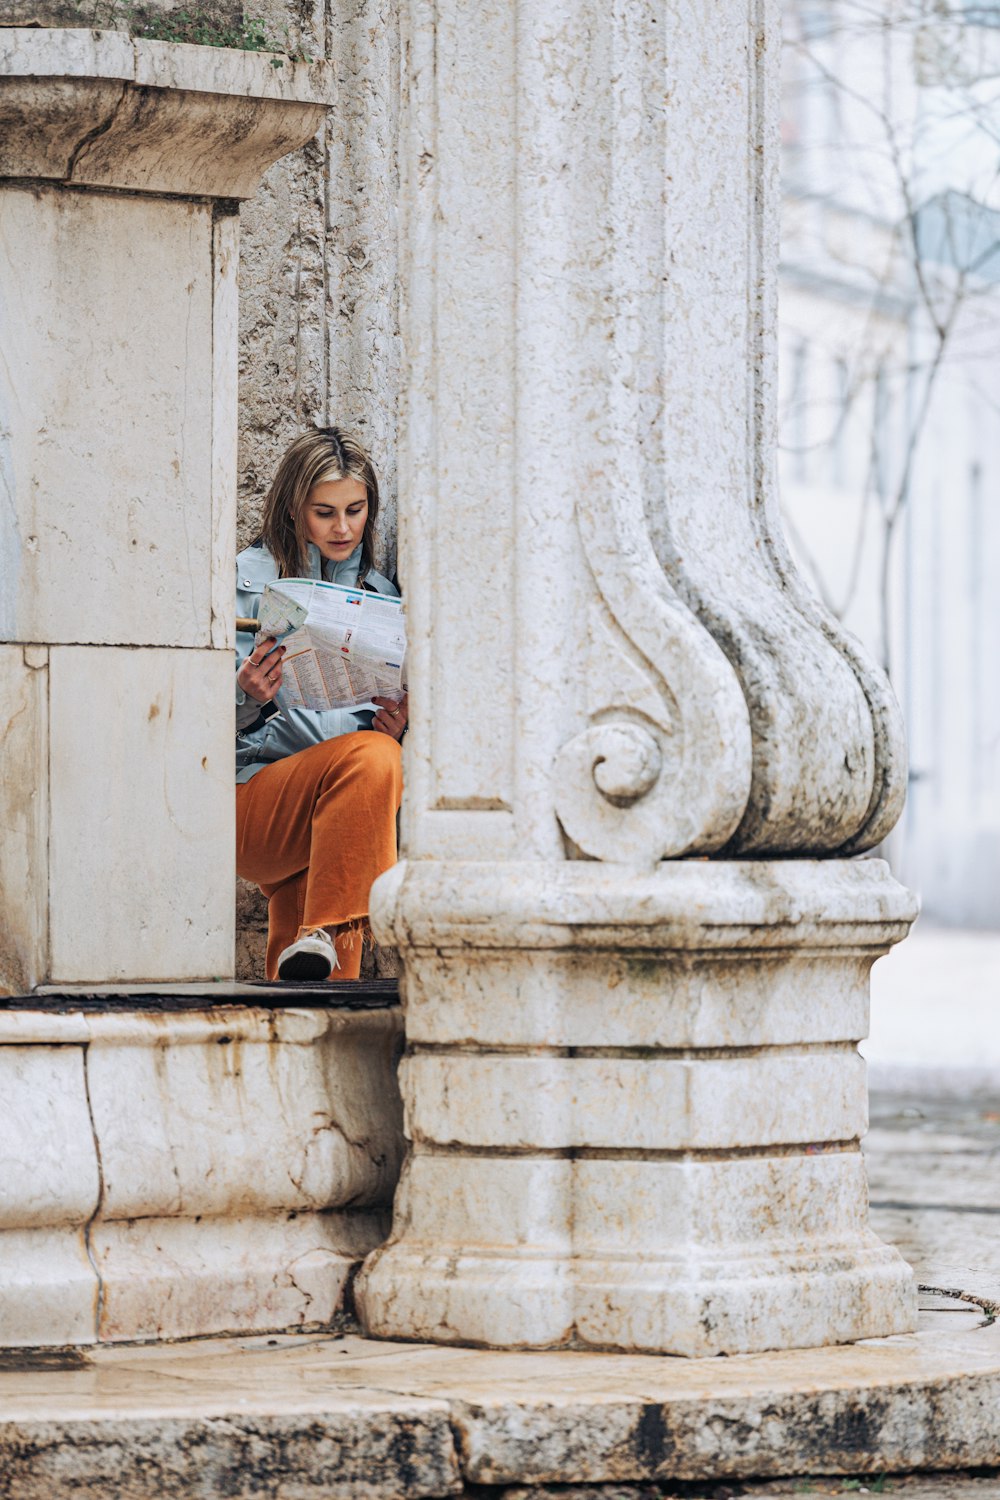 a little girl sitting on a ledge reading a newspaper